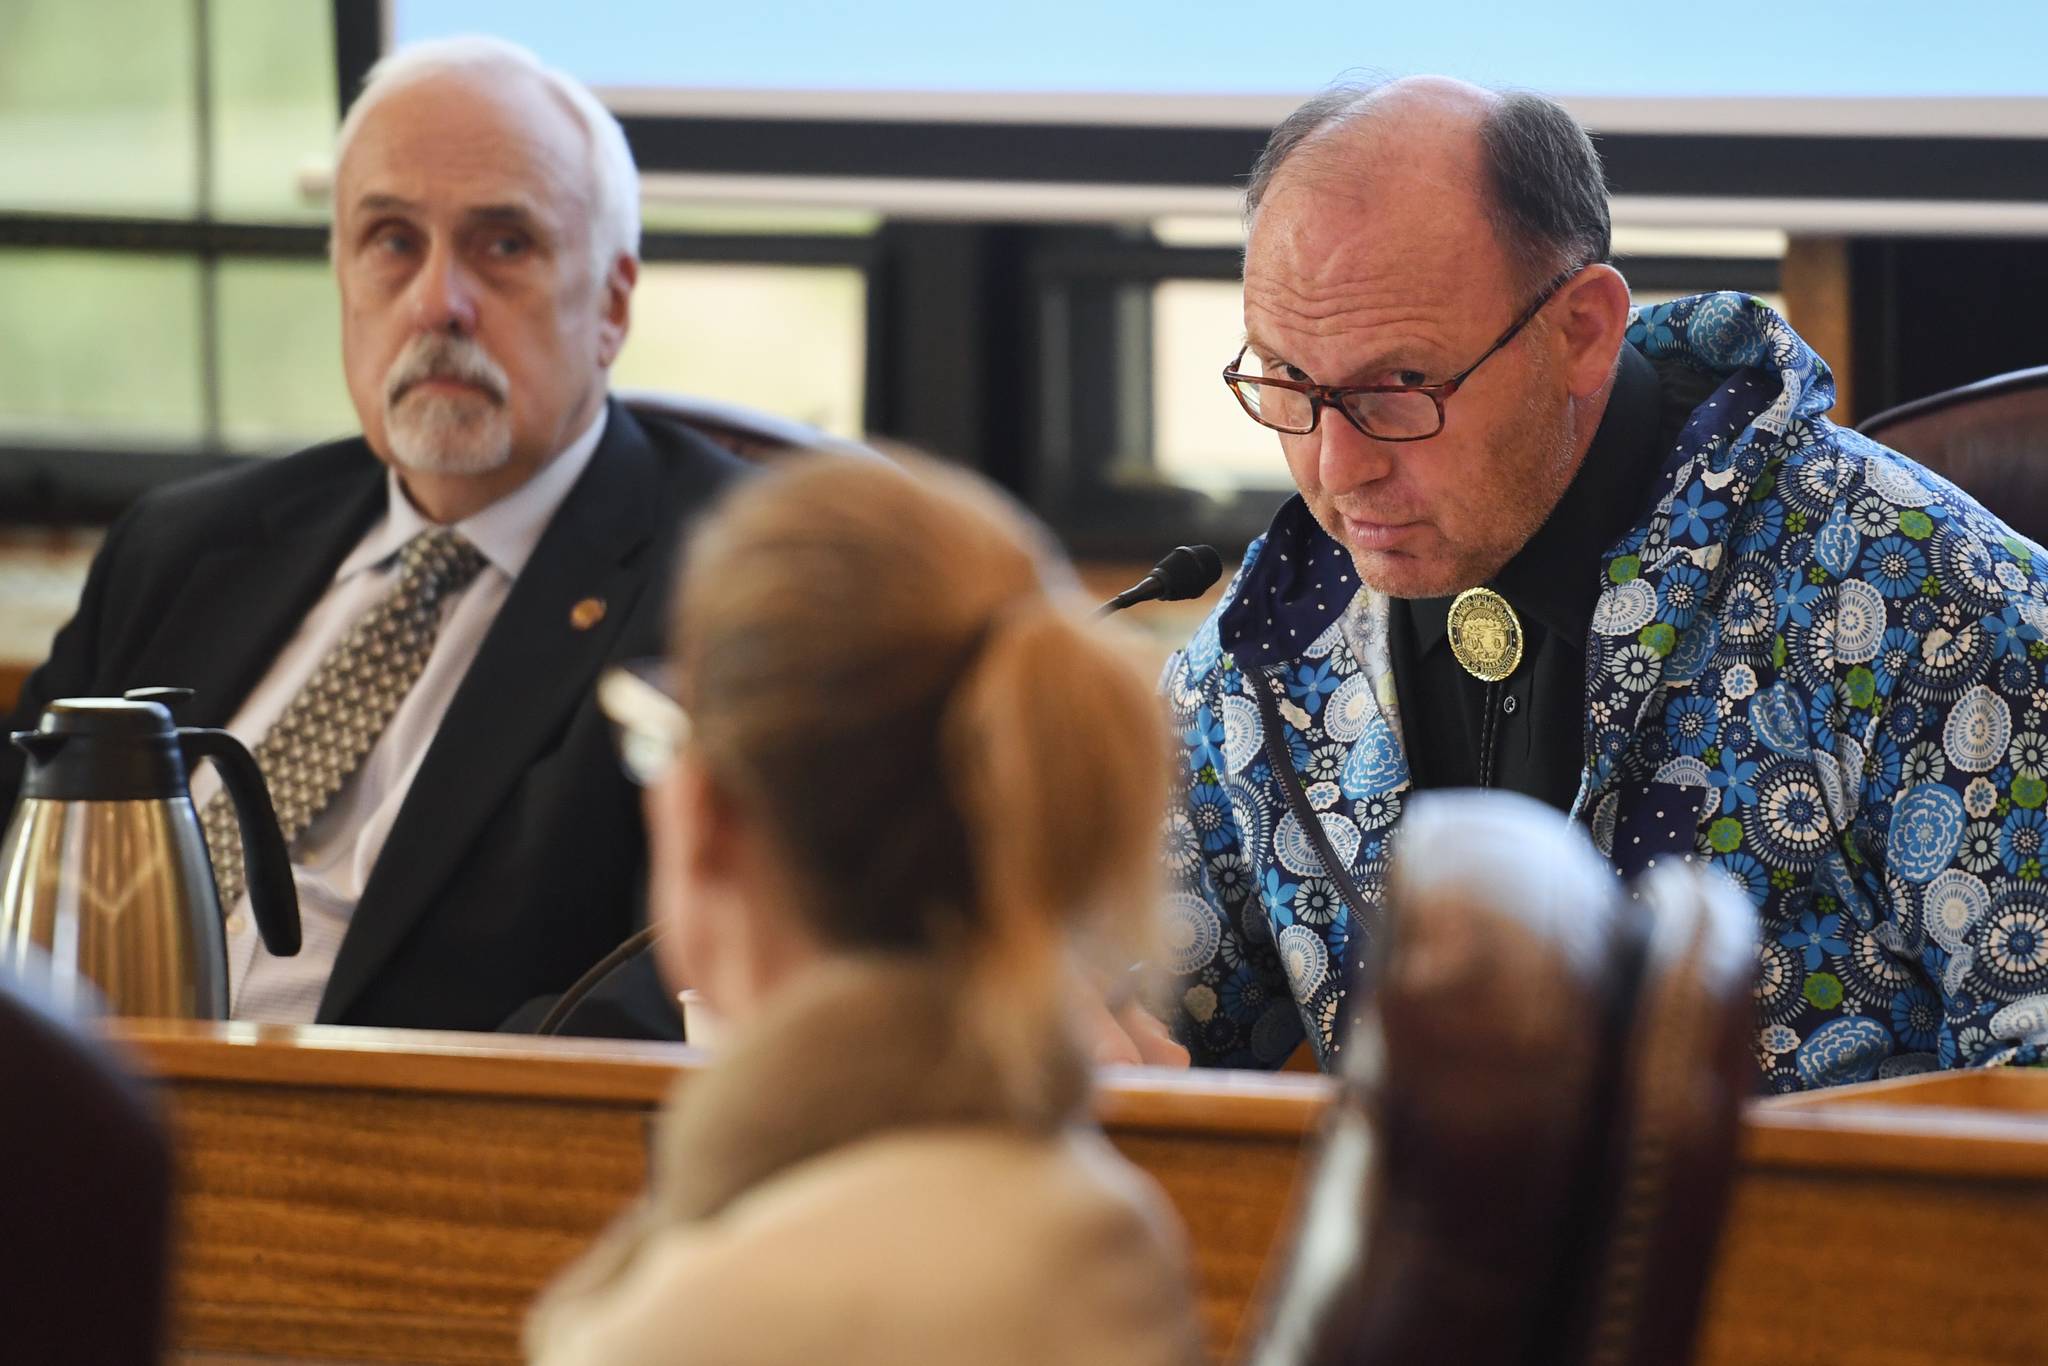 Rep. Gary Knopp, R-Kenai, right, questions Donna Arduin, Director of the Office of Management and Budget, center, as Rep. Bart LeBon, R-Fairbanks, listens during a House Finance Committee meeting on HB 2002 at the Capitol on Thursday, July 18, 2019.(Michael Penn | Juneau Empire)